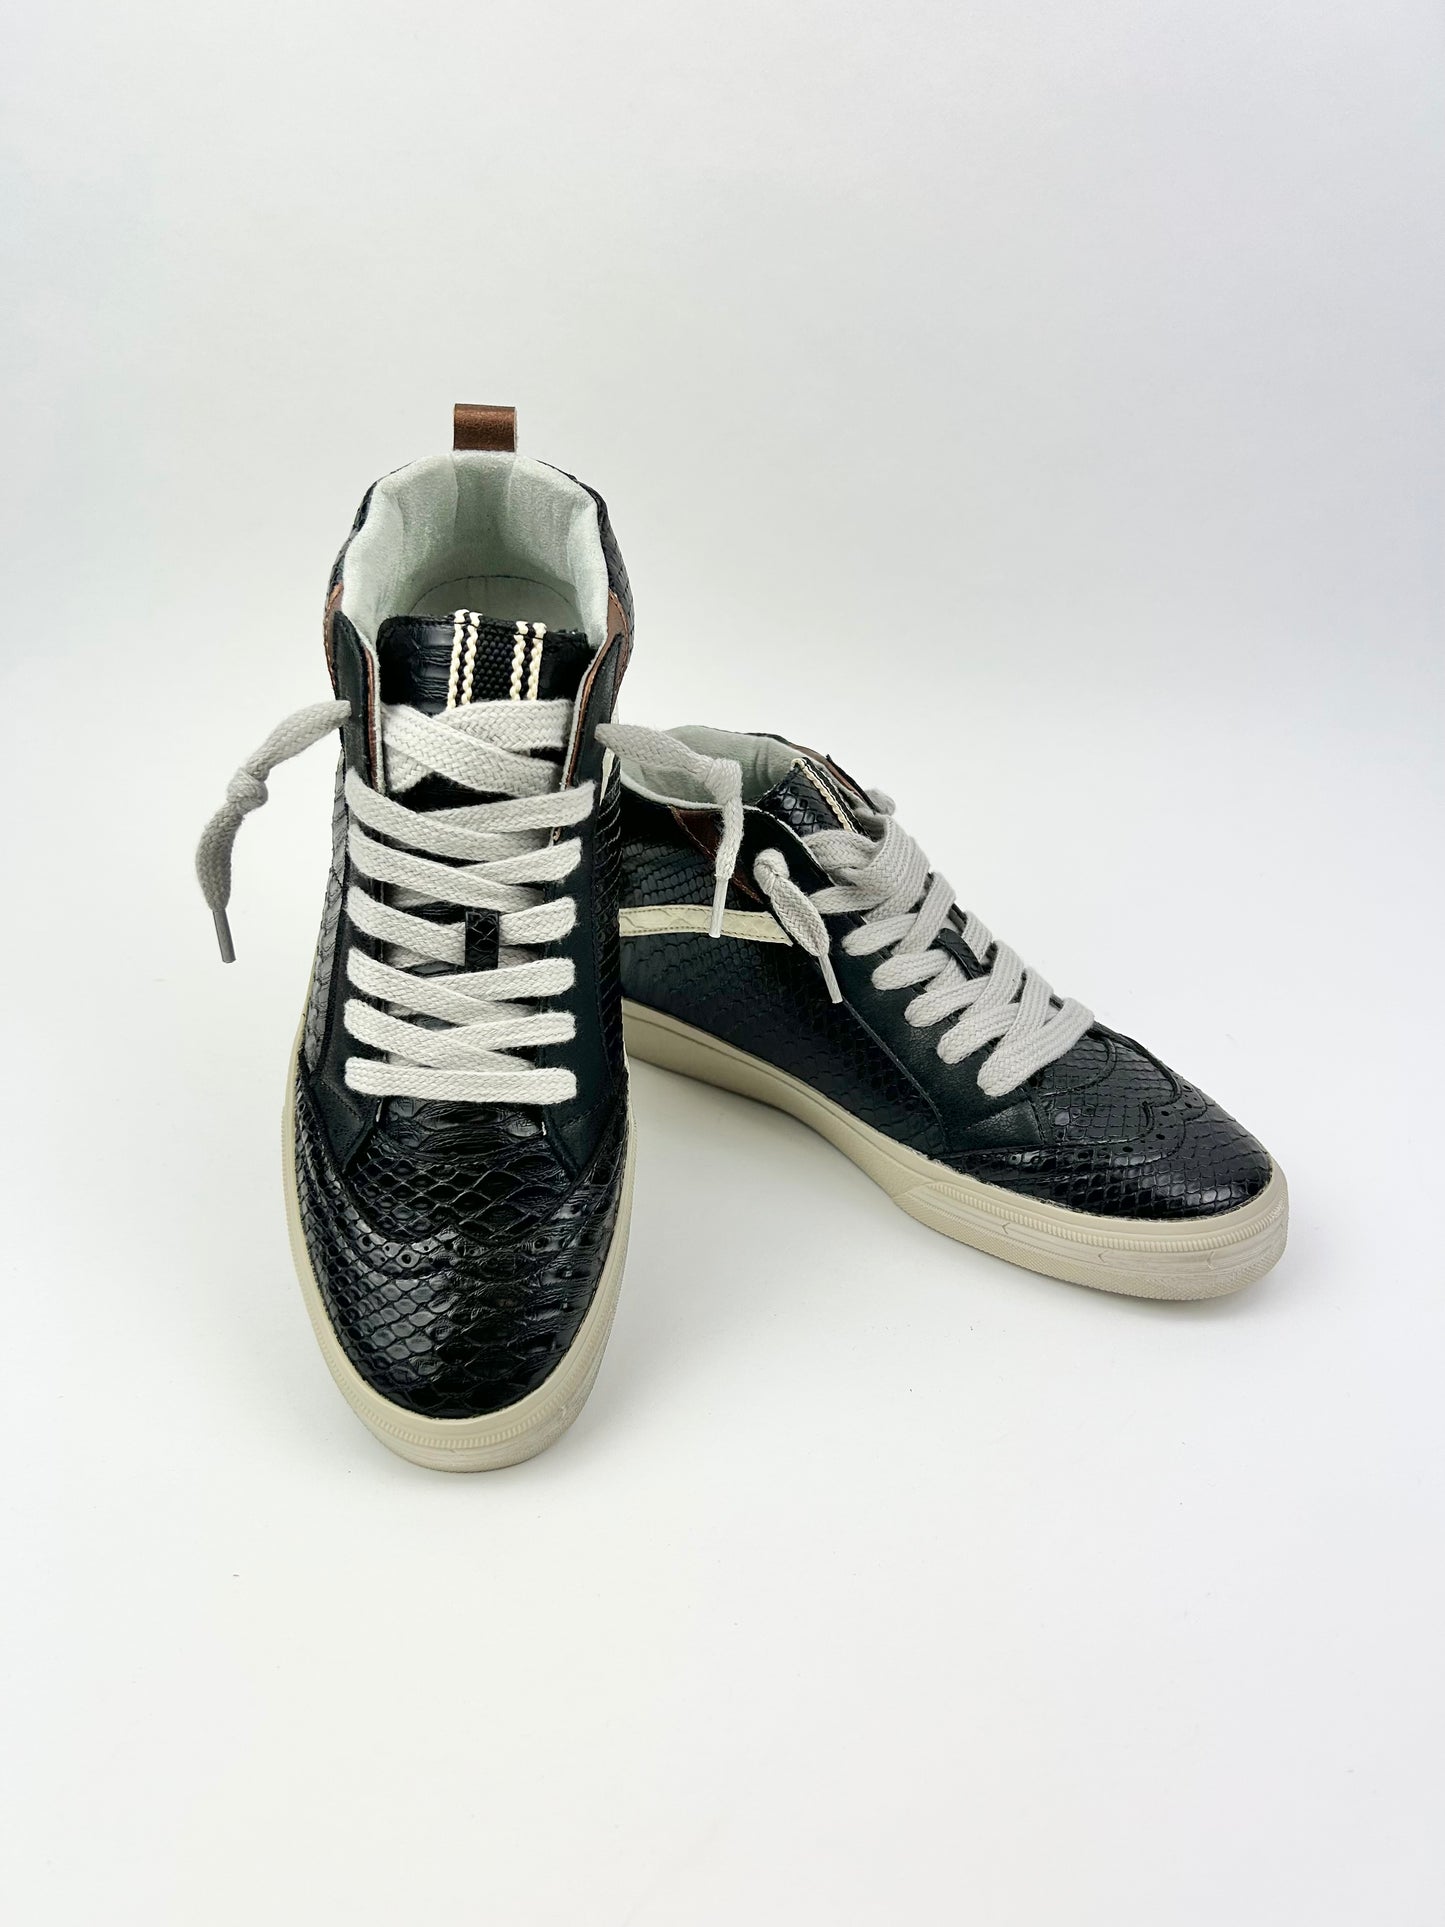 Riley Black Snake Sneaker Shoes in  at Wrapsody